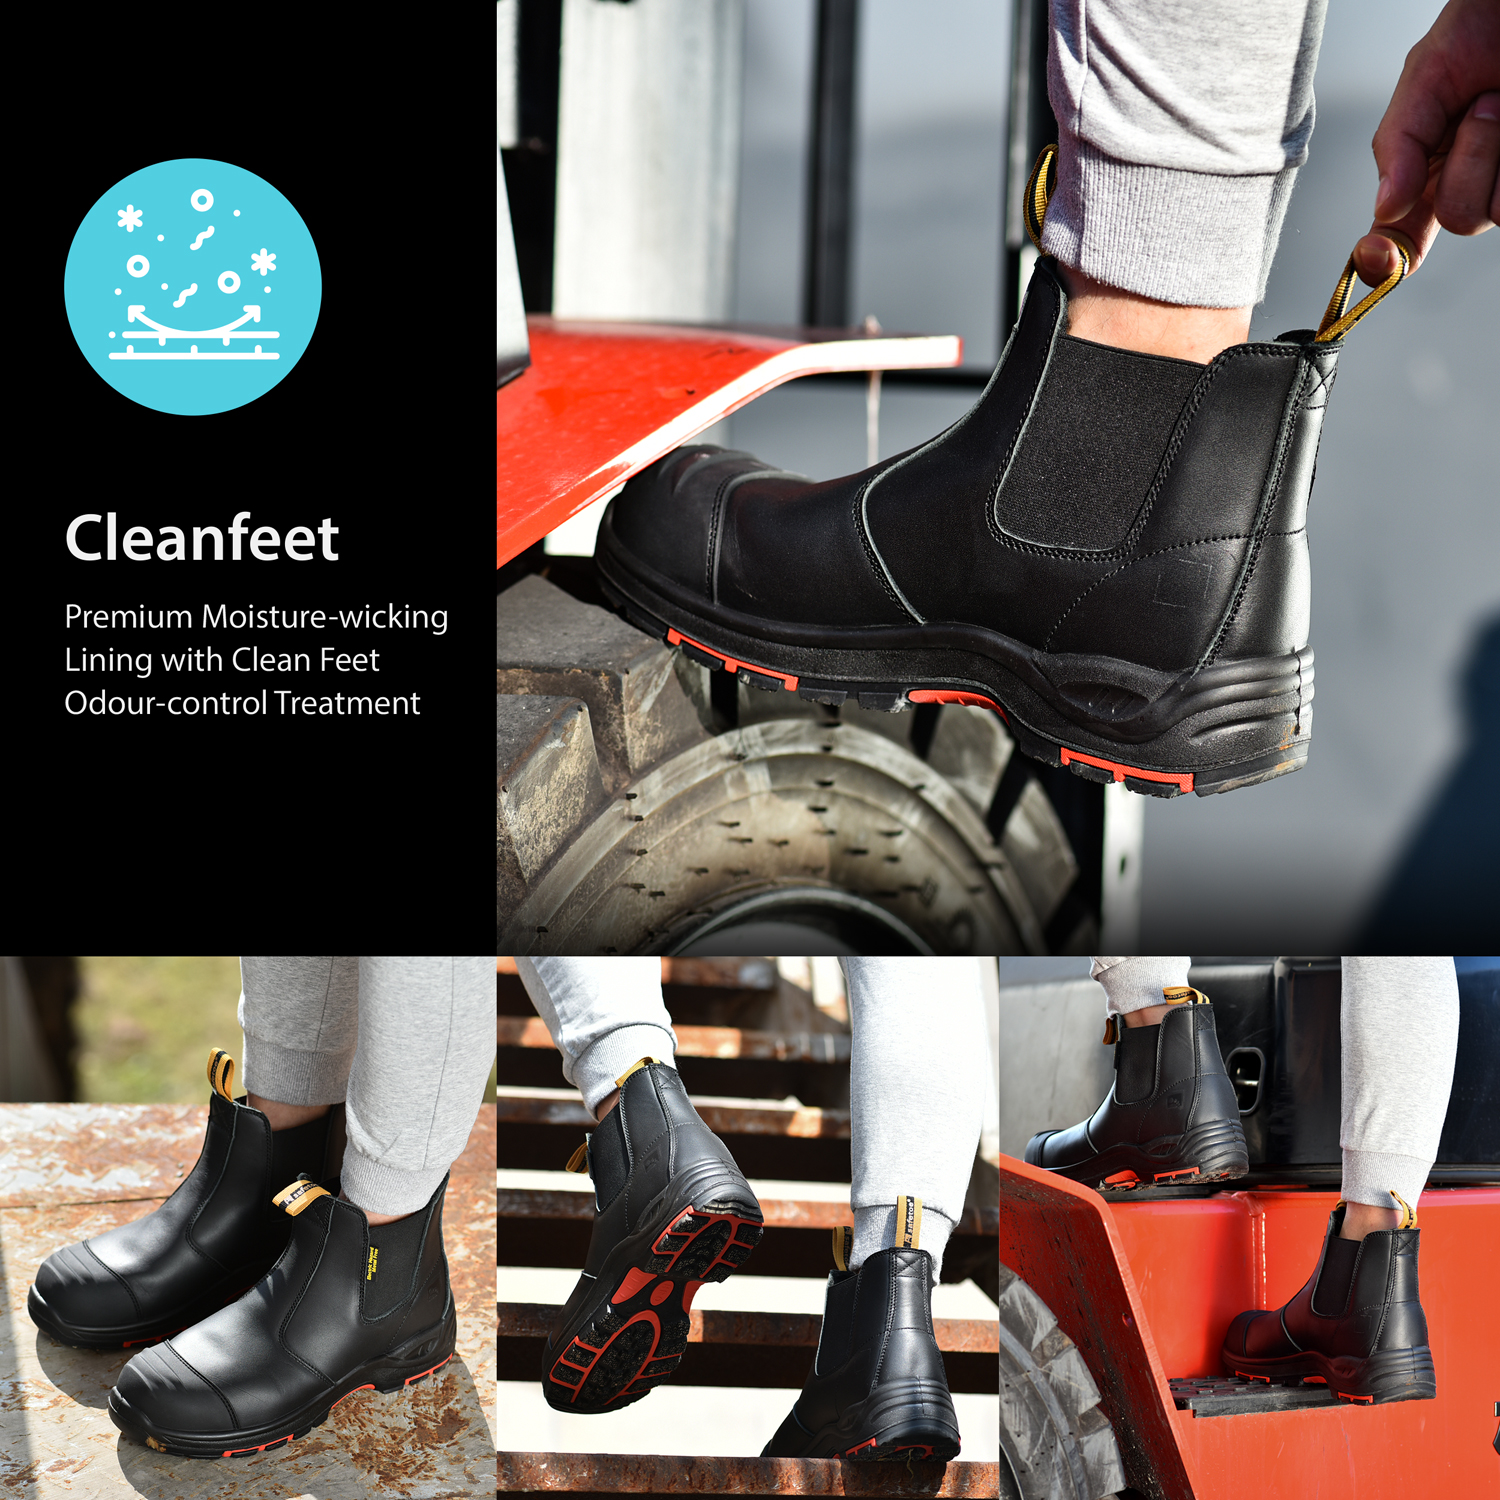 LANGFENG Approved Csa Work M-8025NBK China SHANGHAI Safety - Triangle Canadian Boots from manufacturer Green INDUSTRIAL